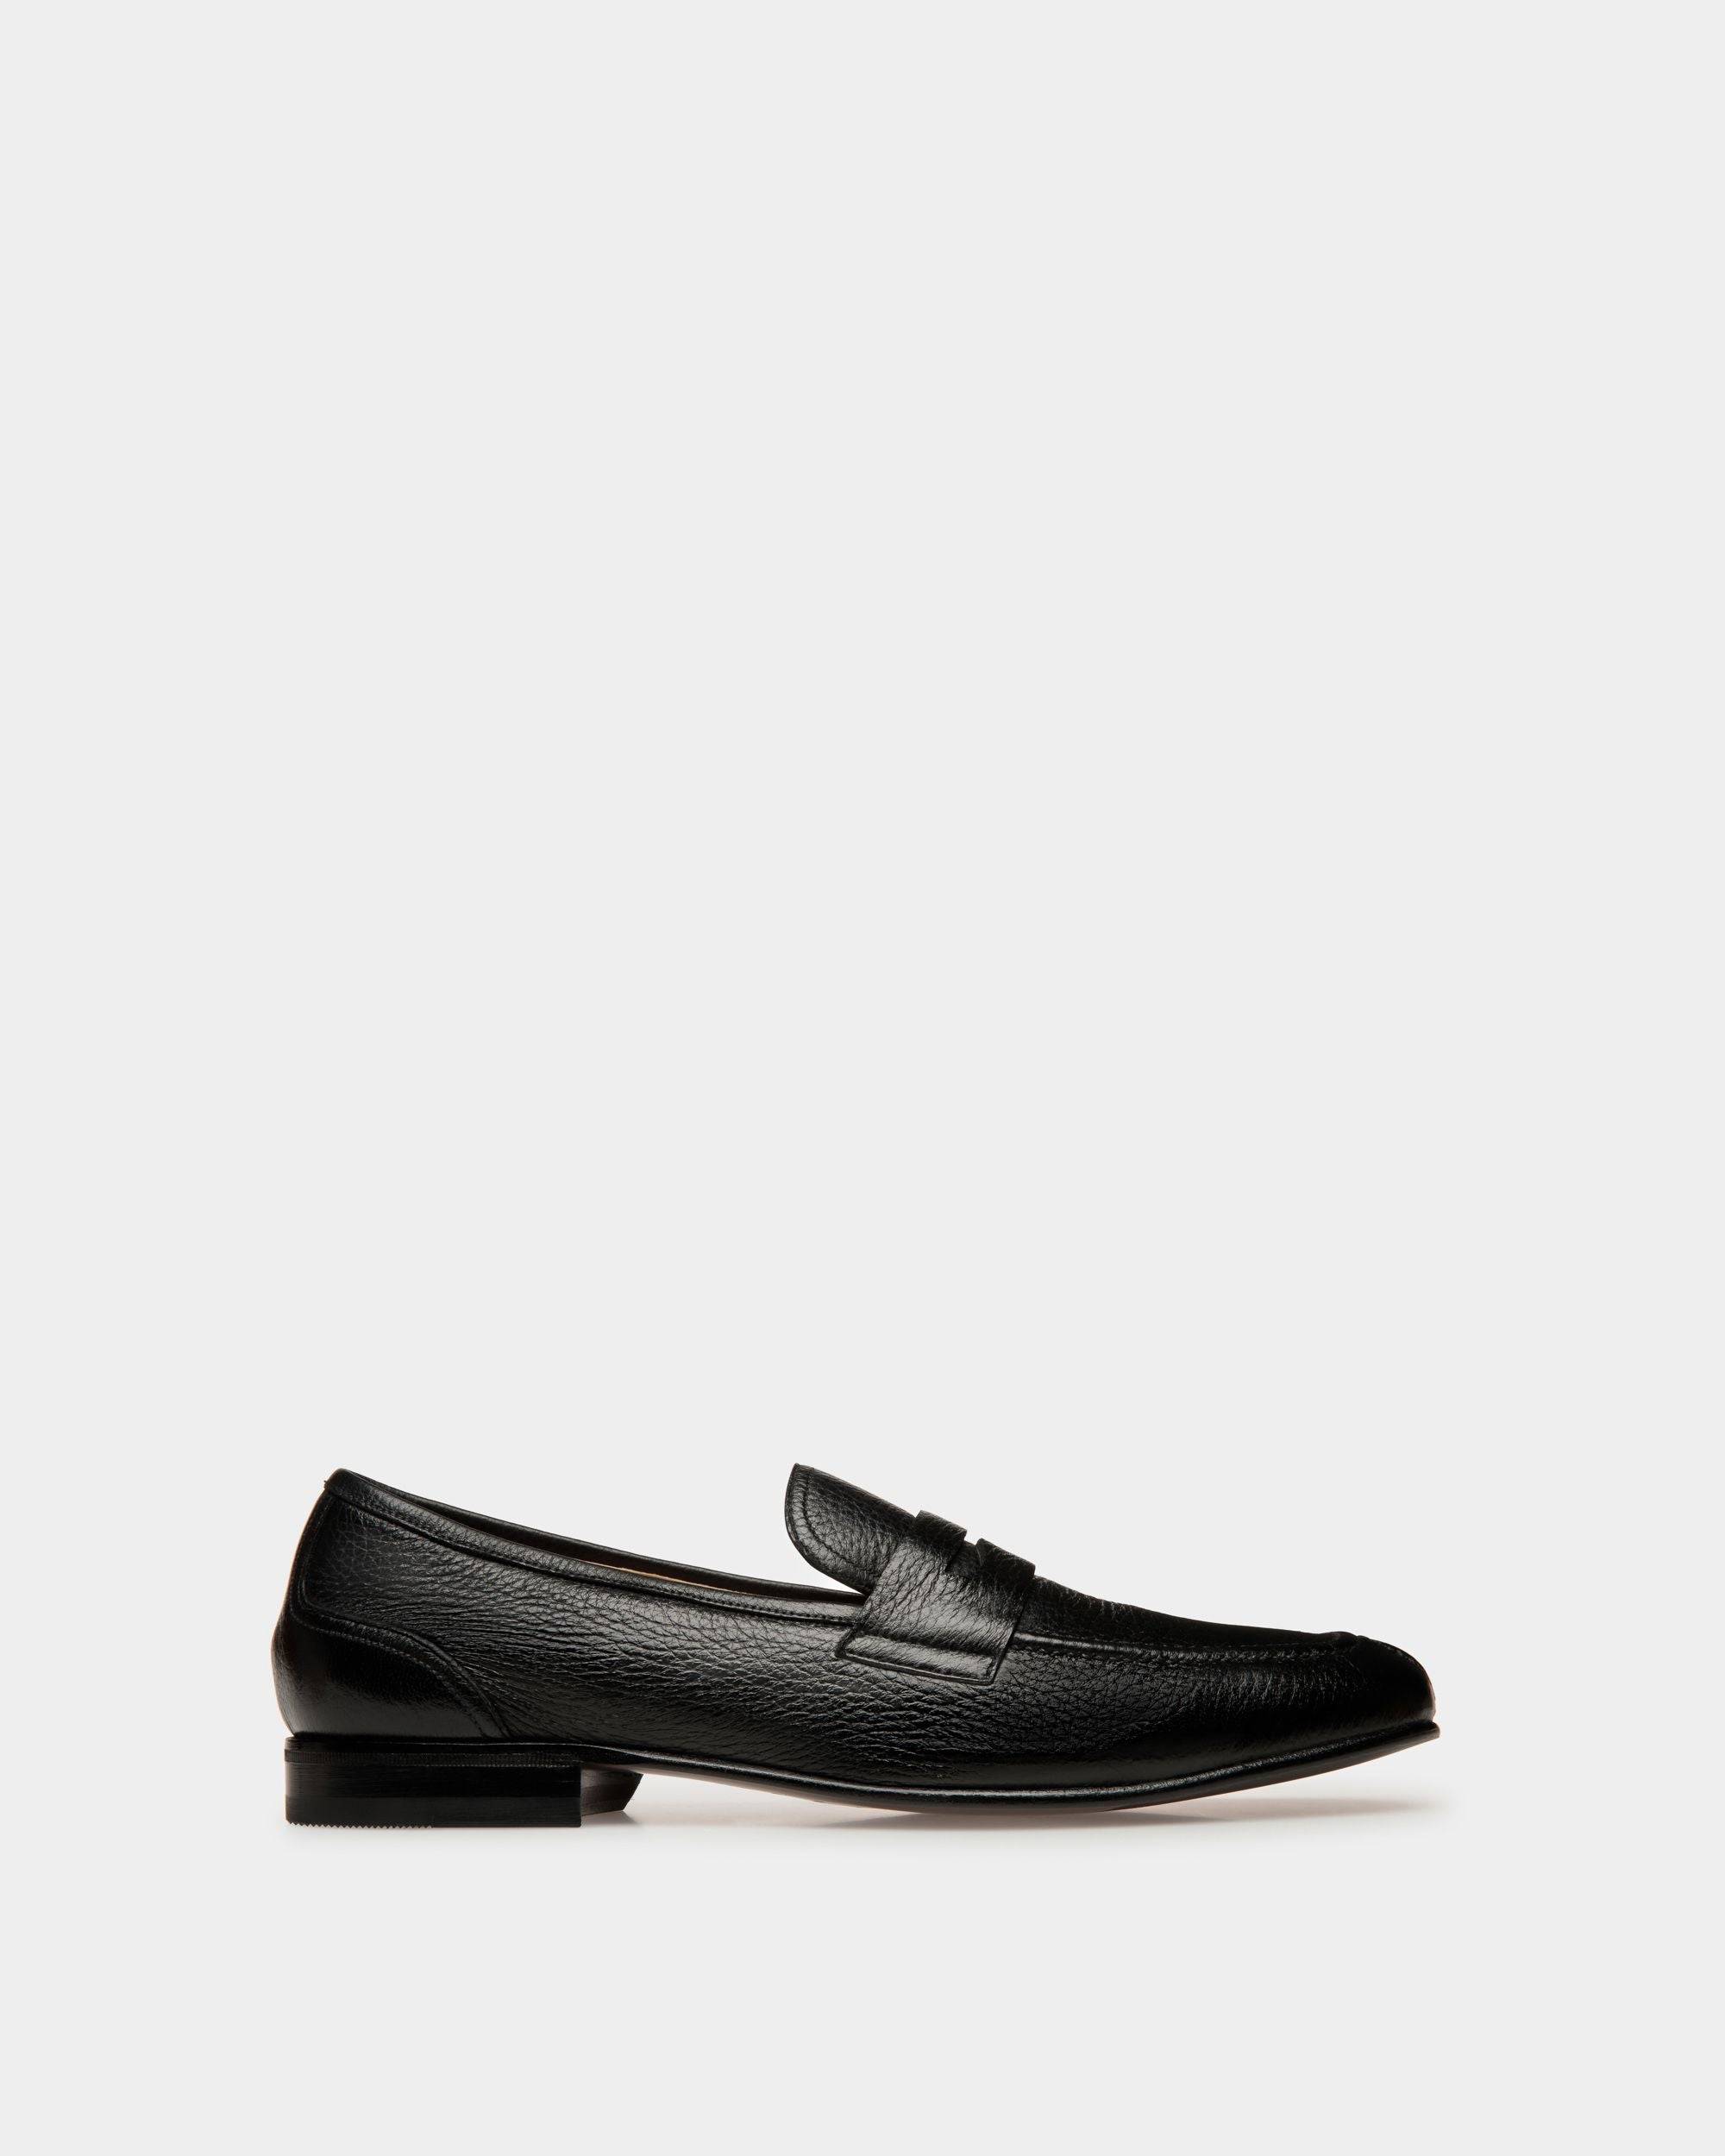 Men's Suisse Loafers In Black Leather | Bally | Still Life Side